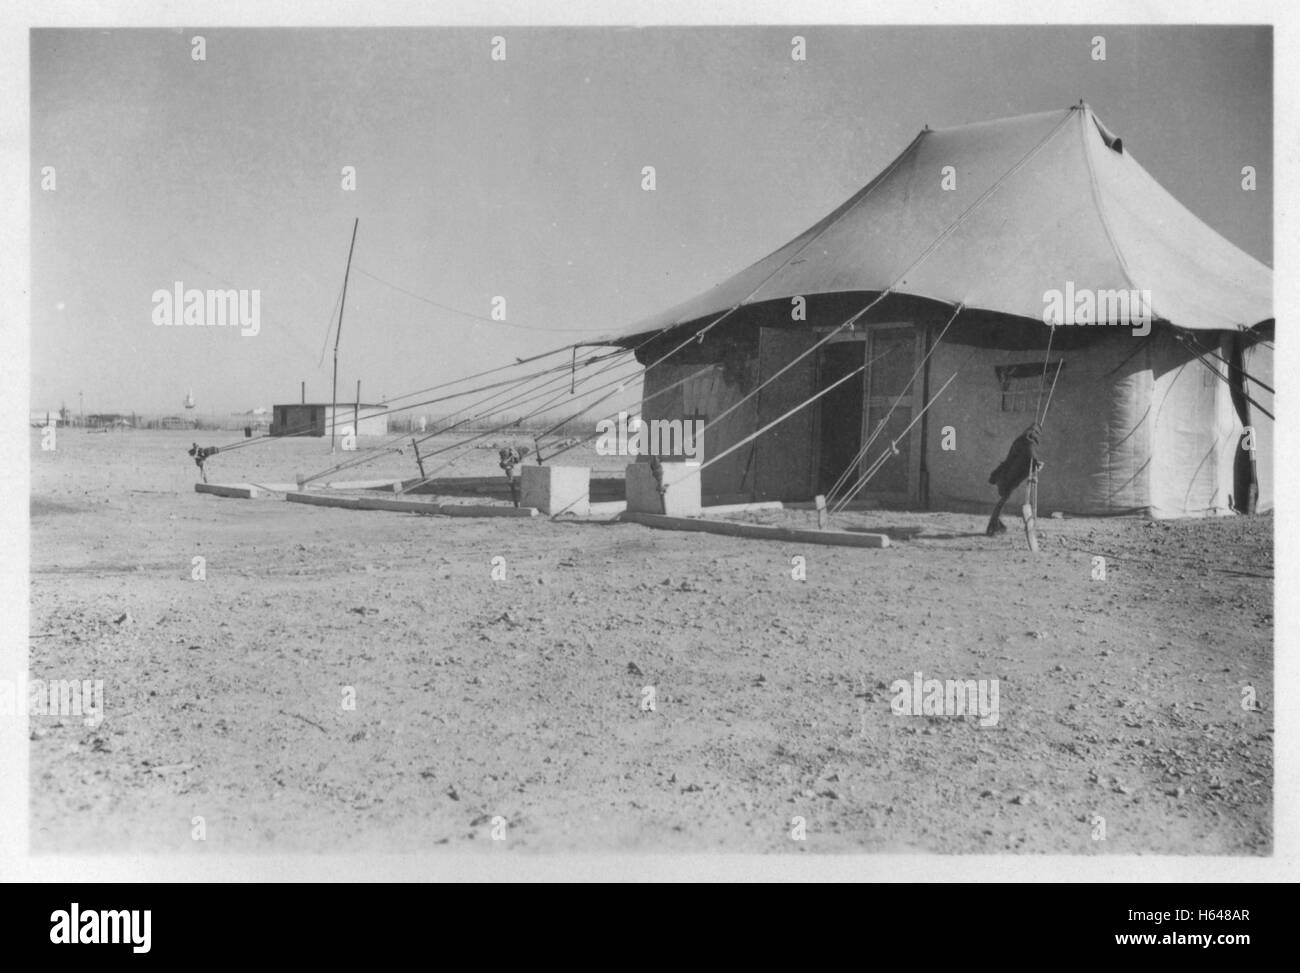 British army tent at 10 Base Ordnance Depot Royal Army Ordnance Corps (RAOC) camp at Geneifa Ismailia area near the Suez Canal 1952 in the period prior to withdrawal of British troops from the Suez Canal zone and the Suez Crisis Stock Photo